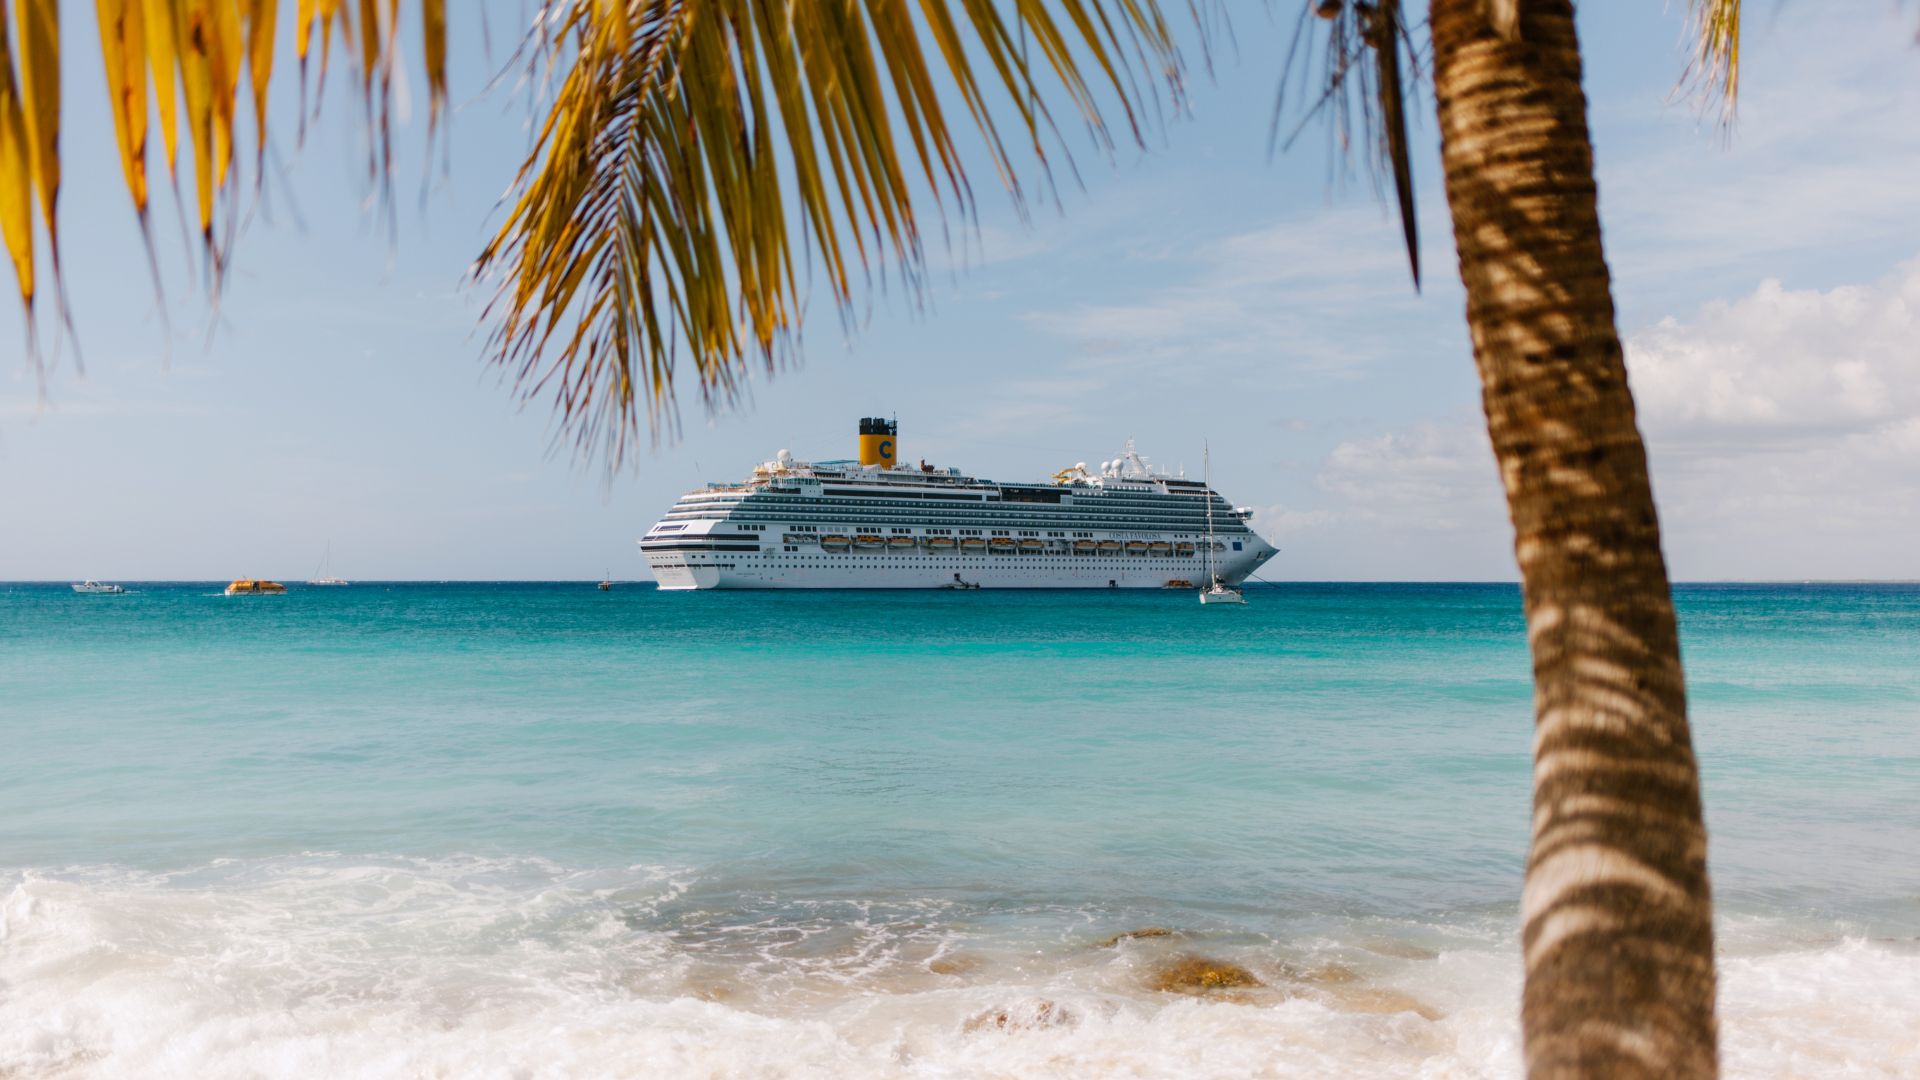 A luxury cruise out at sea, viewed from a Caribbean beach with palm trees in the foreground.